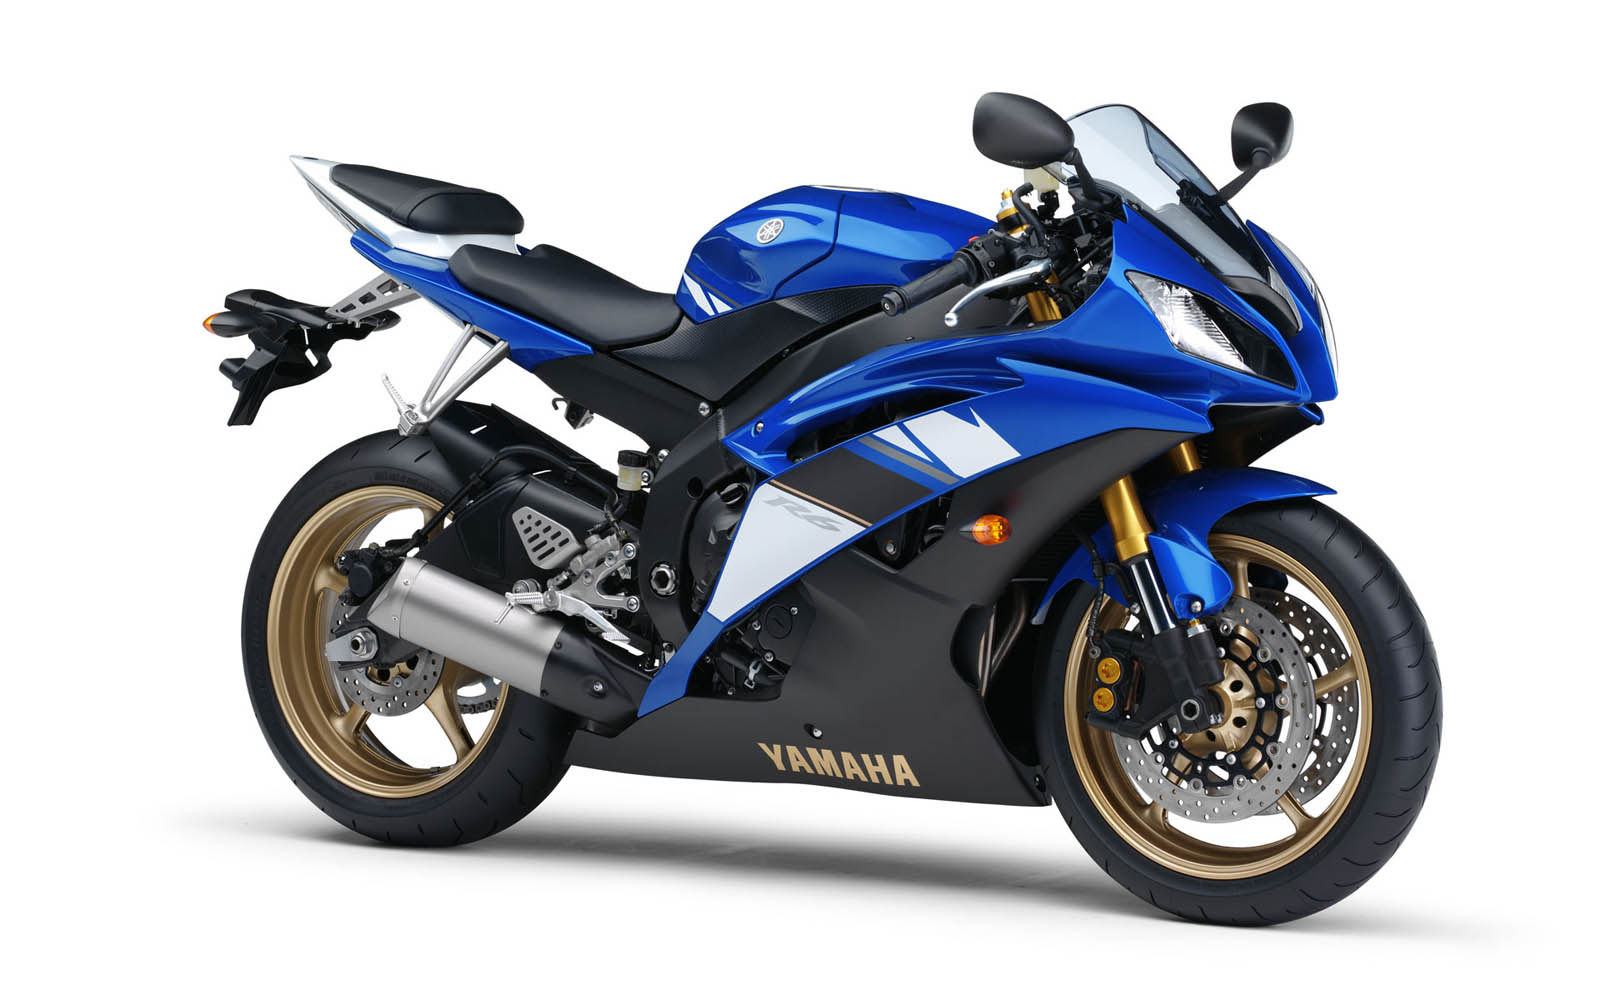 Tag Yamaha R6 Bike Wallpapers BackgroundsPhotos Images and